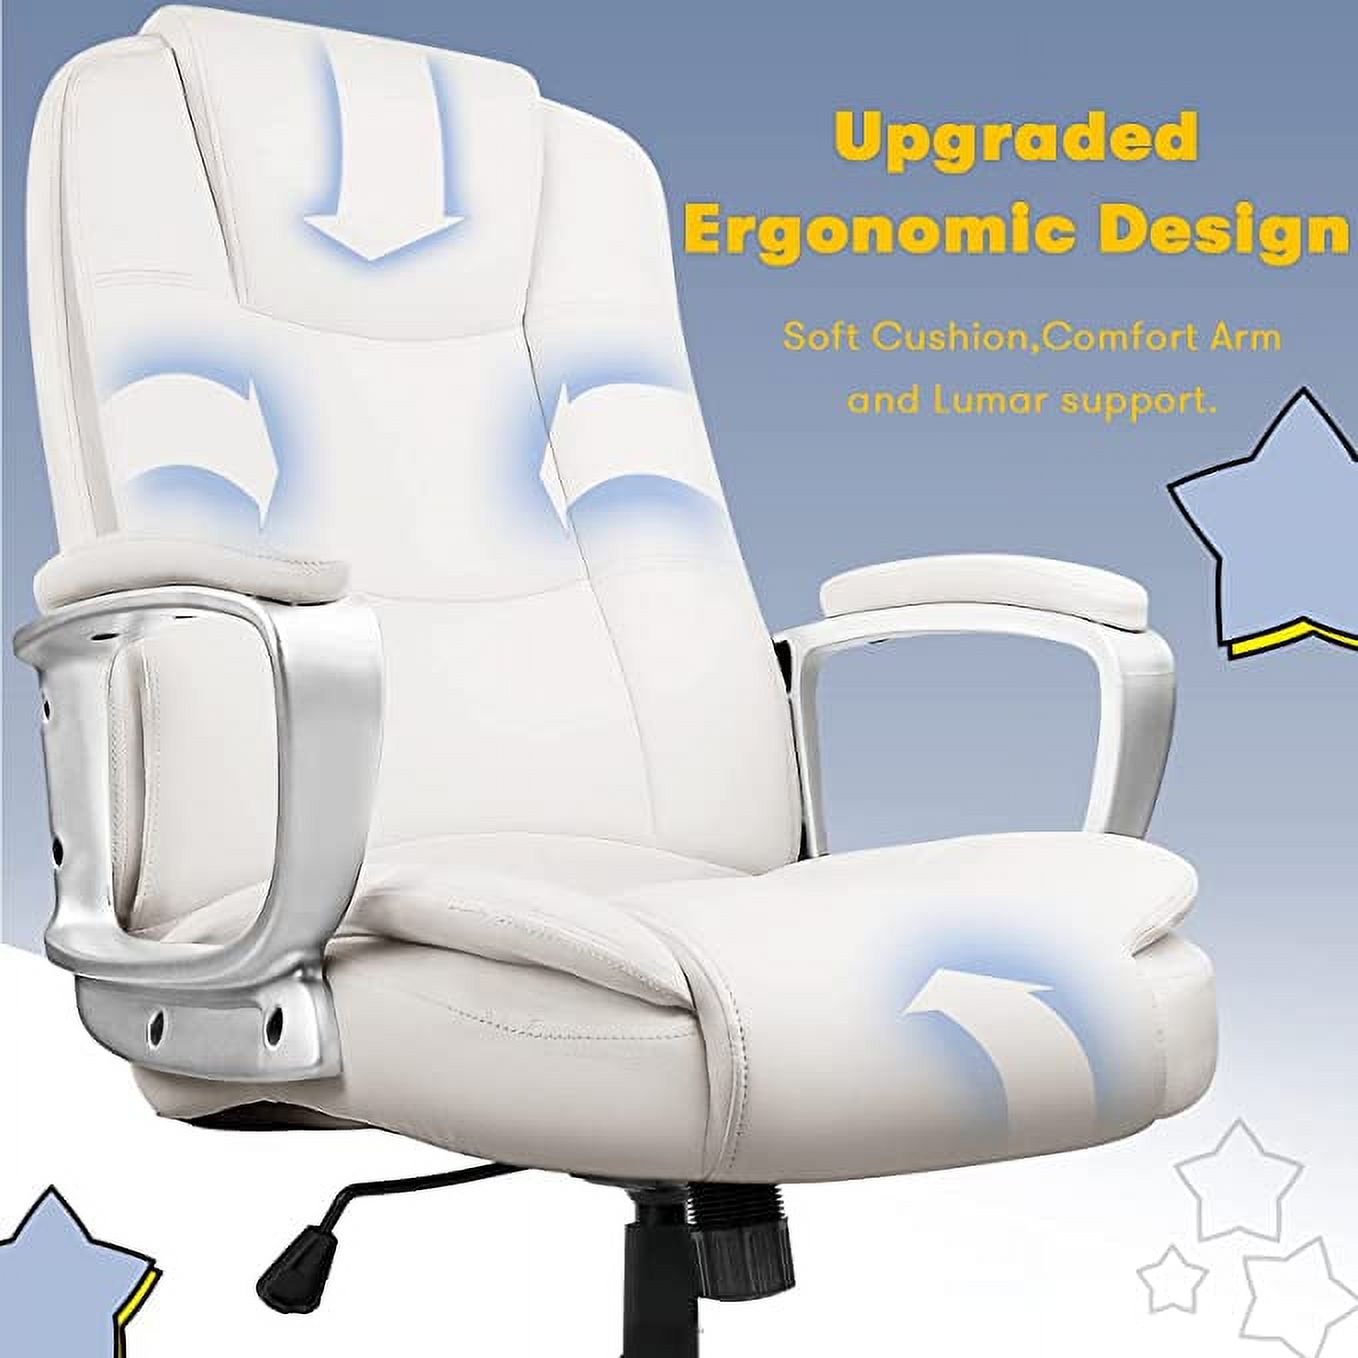 Home Office Chair, Comfortable Heavy Duty Design, Ergonomic High Back Cushion Lumbar Back Support, Computer Desk Chair, Big and Tall Chair, Adjustable Executive Leather Chair with Arms (White) - image 4 of 7